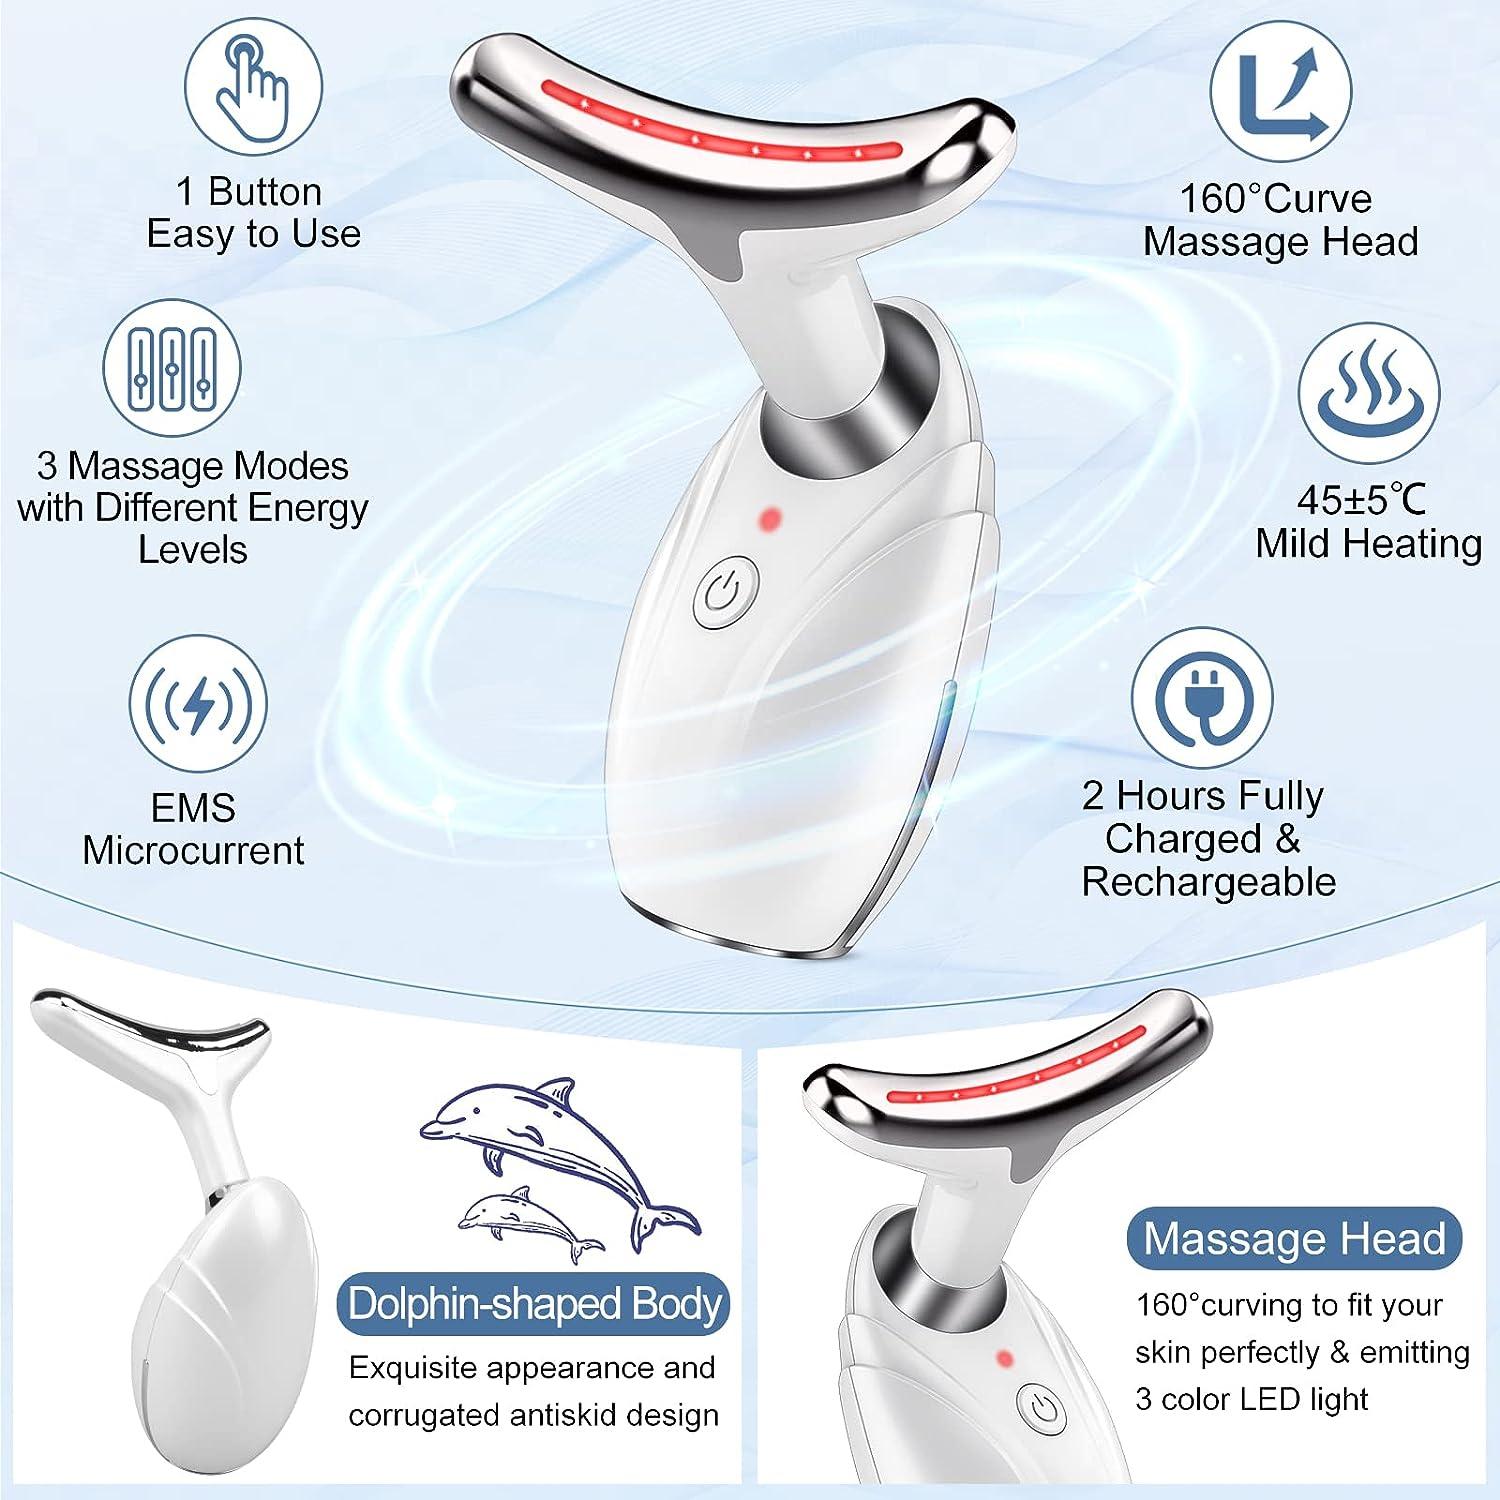 Purify Ems Heat Face Lifting Massager With 3 Color Light : Target